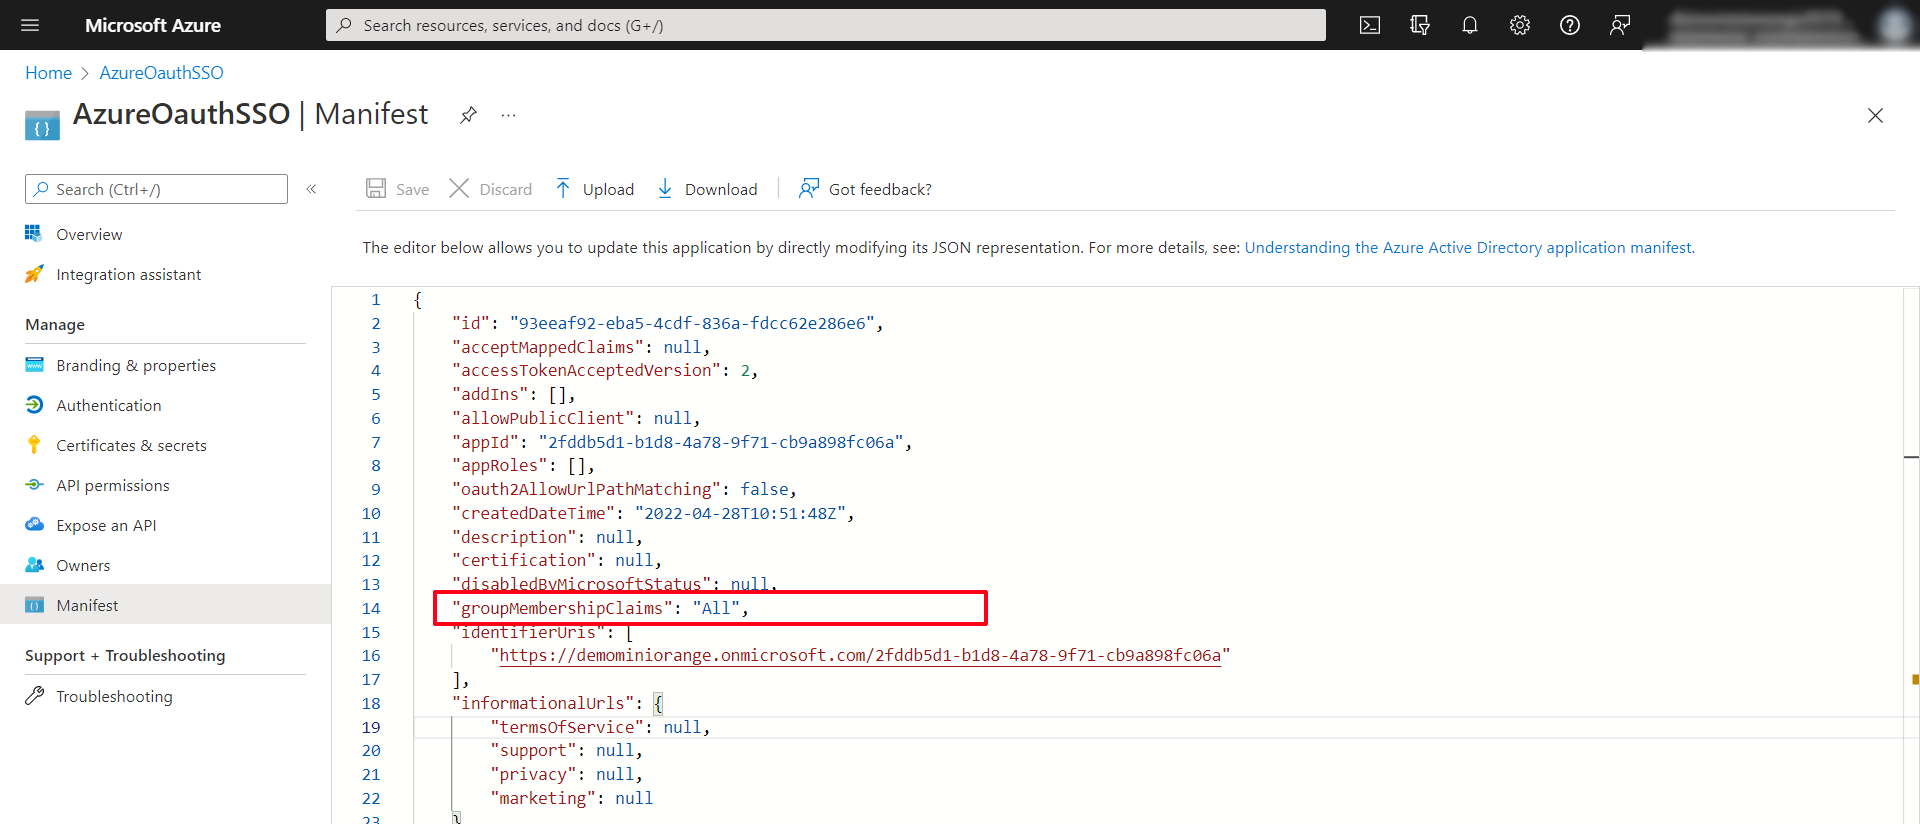 Azure AD oauth SSO shopify - Group Membership Claims